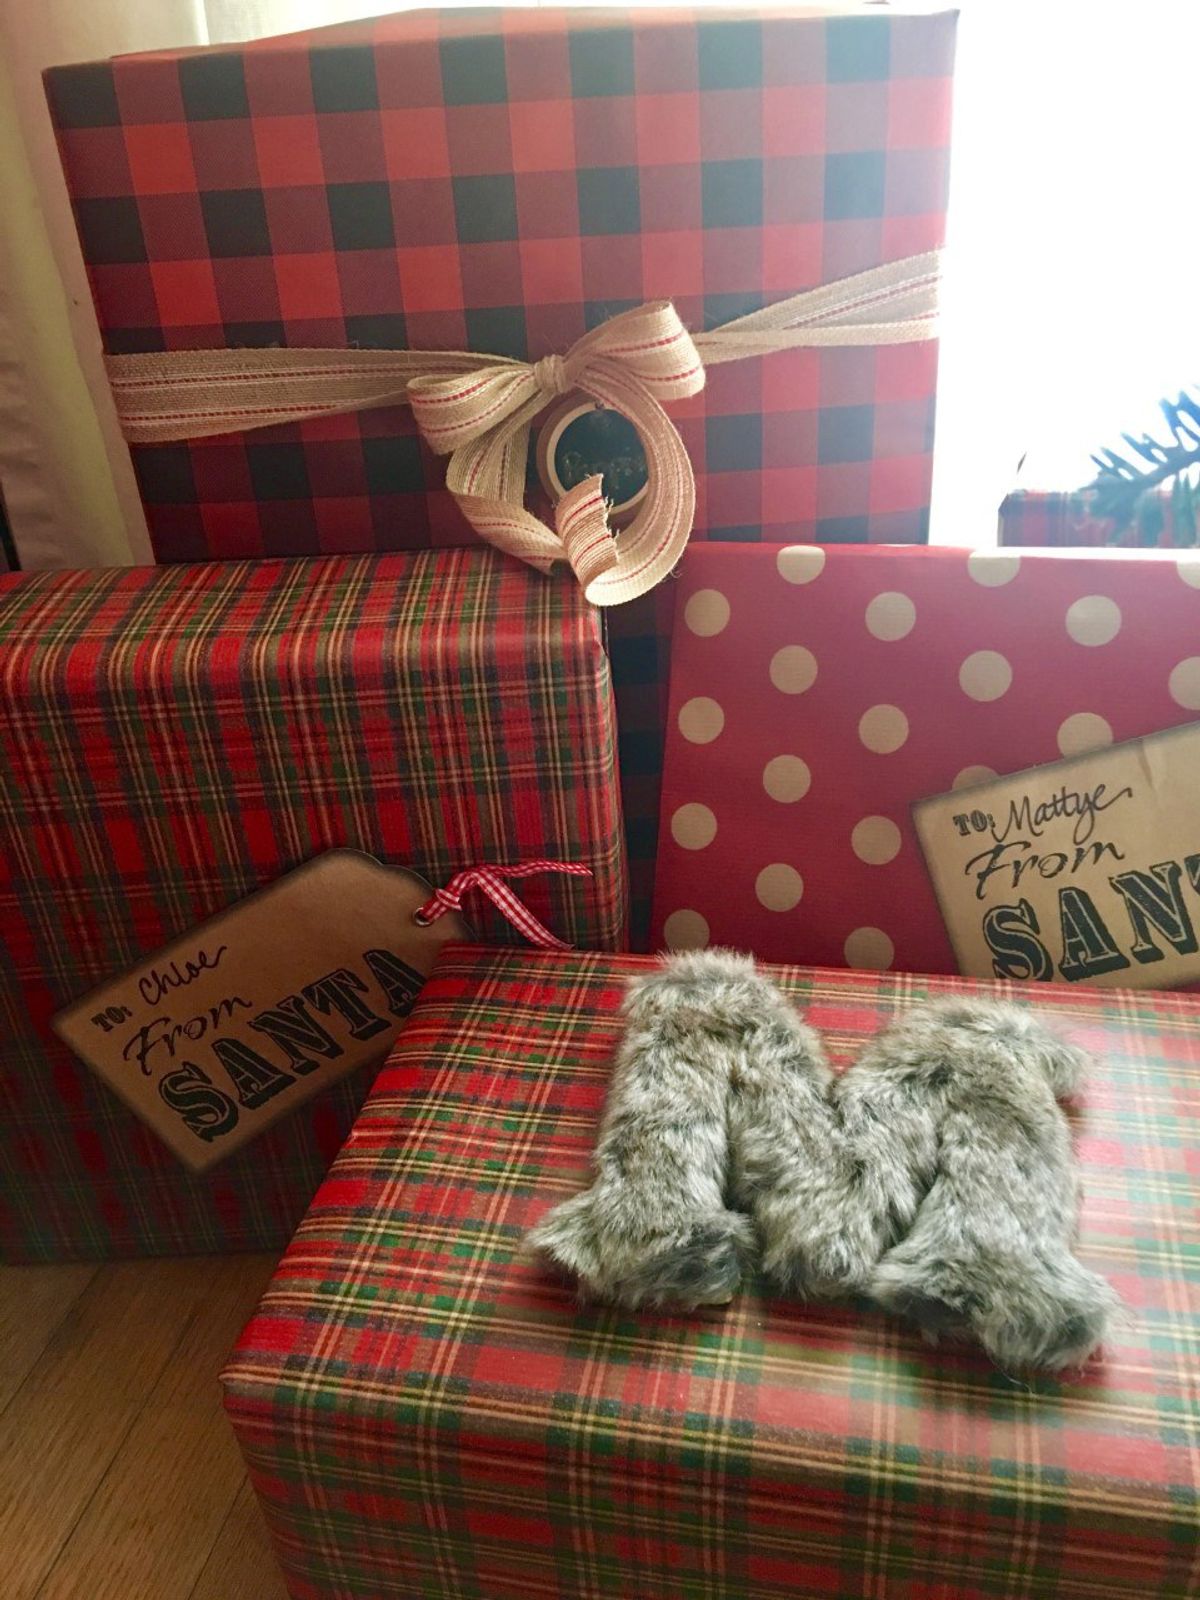 11 Christmas Gifts Any Girl Would Love